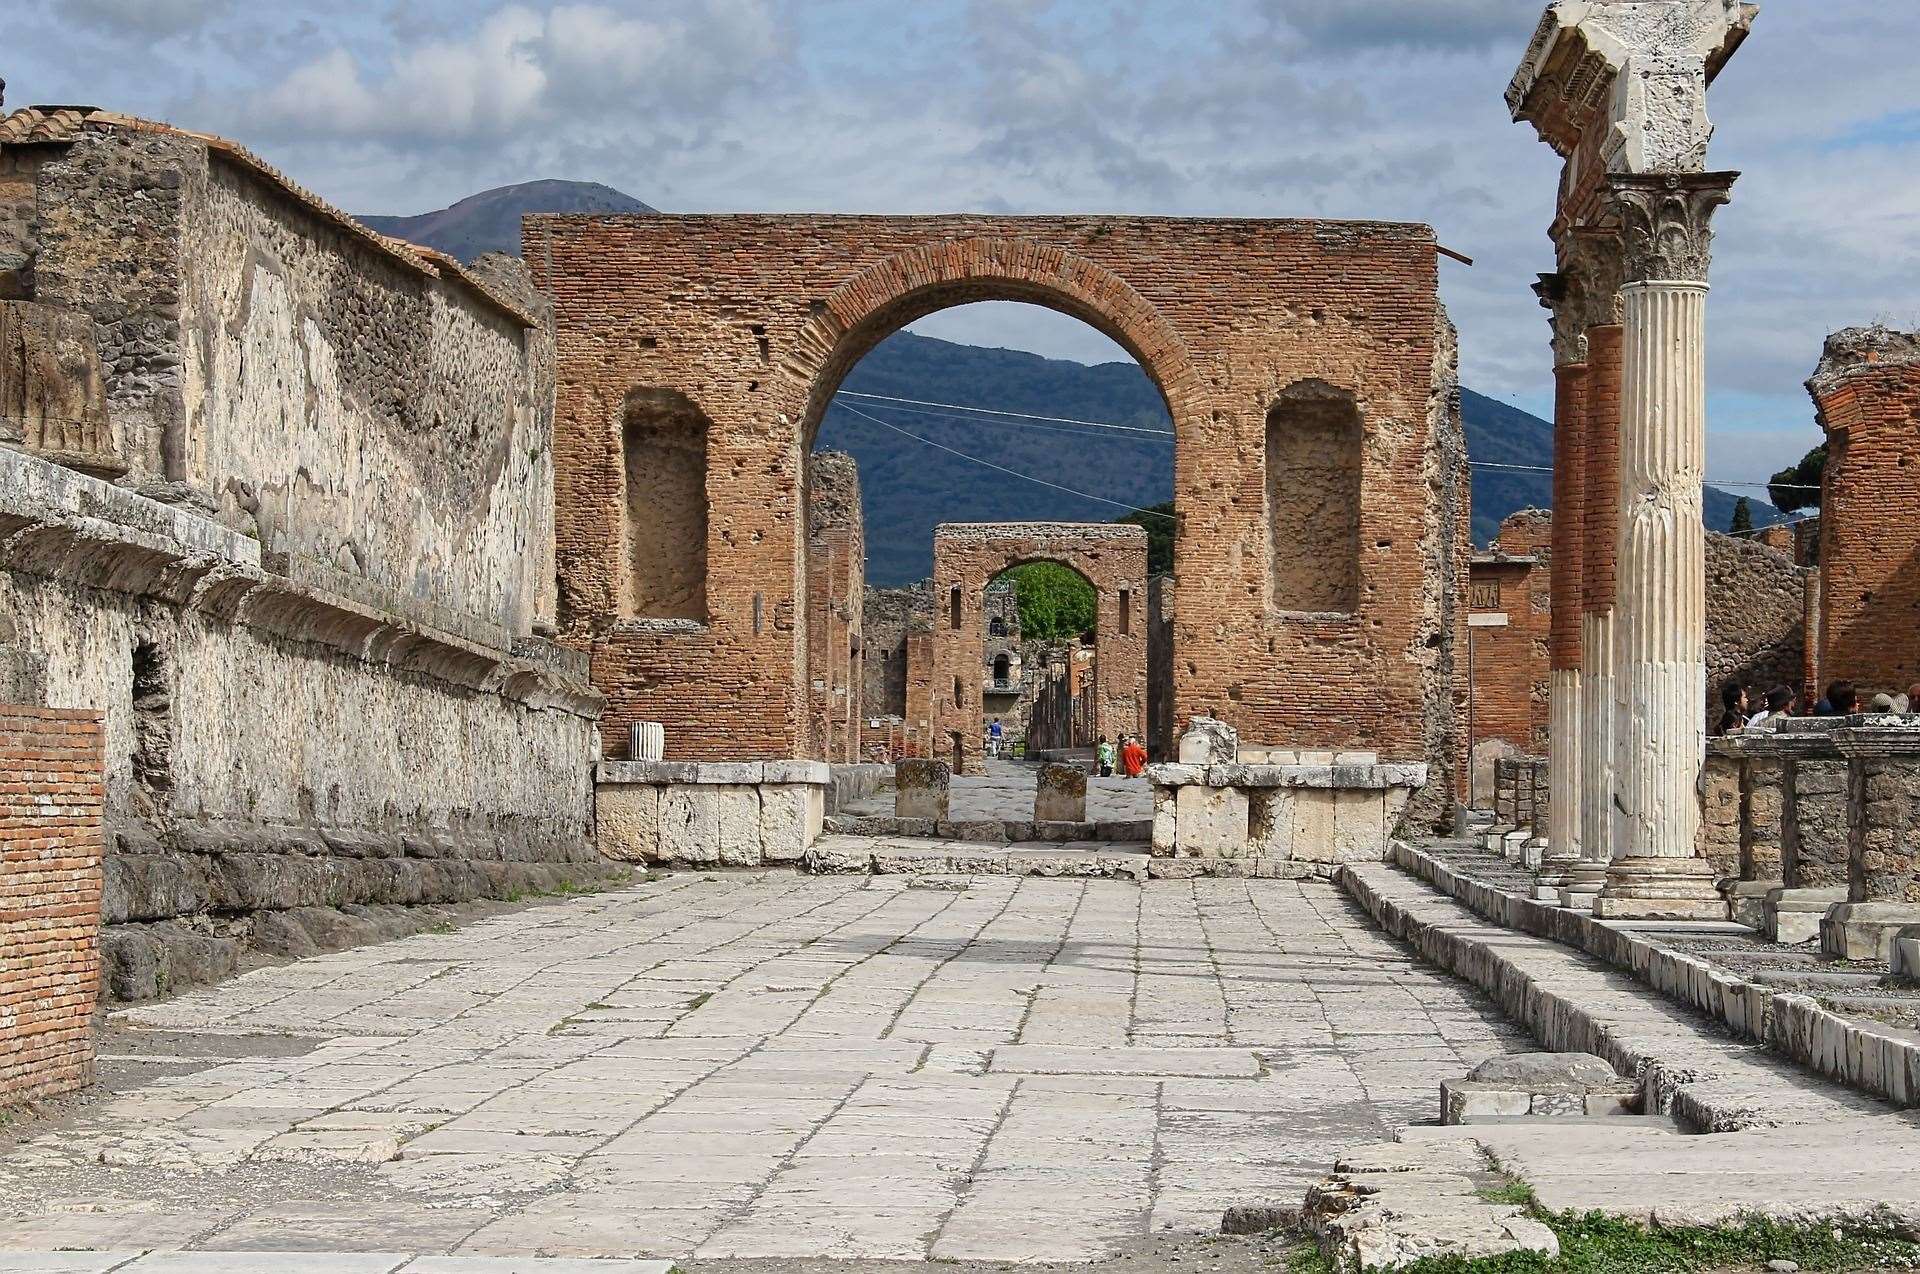 Pompeii, where a British tourist is alleged to have tried to steal tiles from a mosaic (8379902)